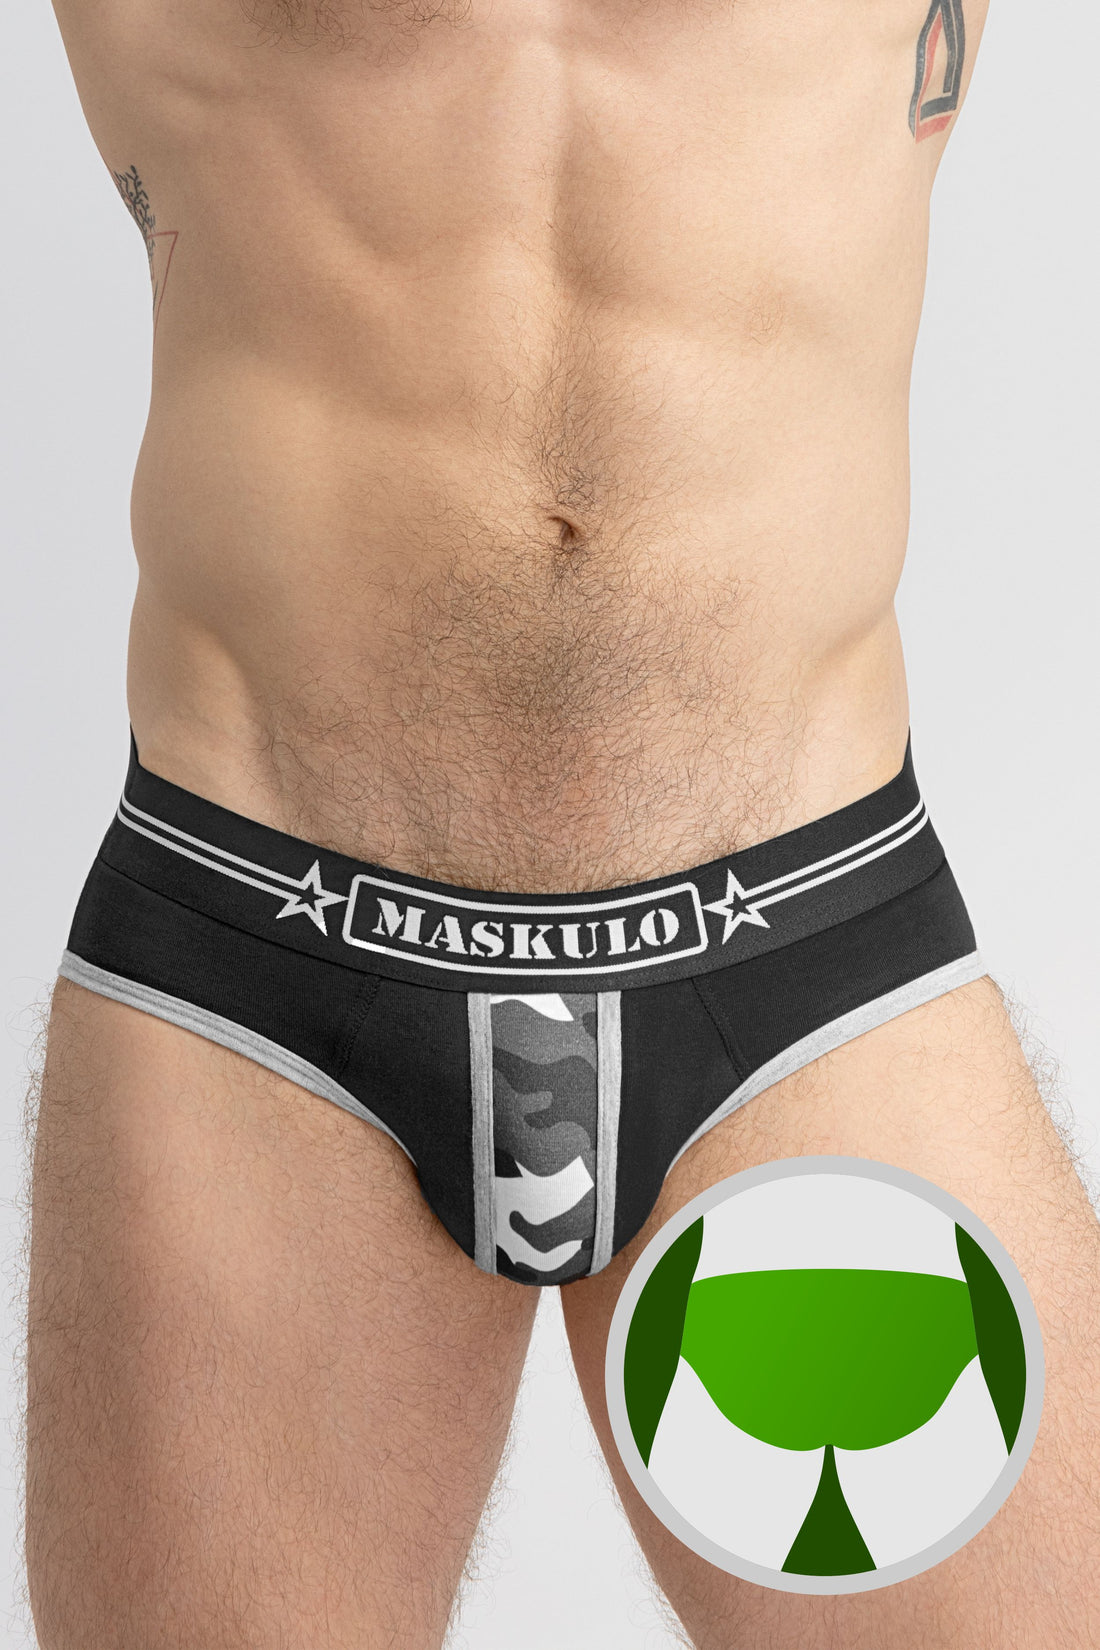 Military Briefs with Lifter. Black+Grey